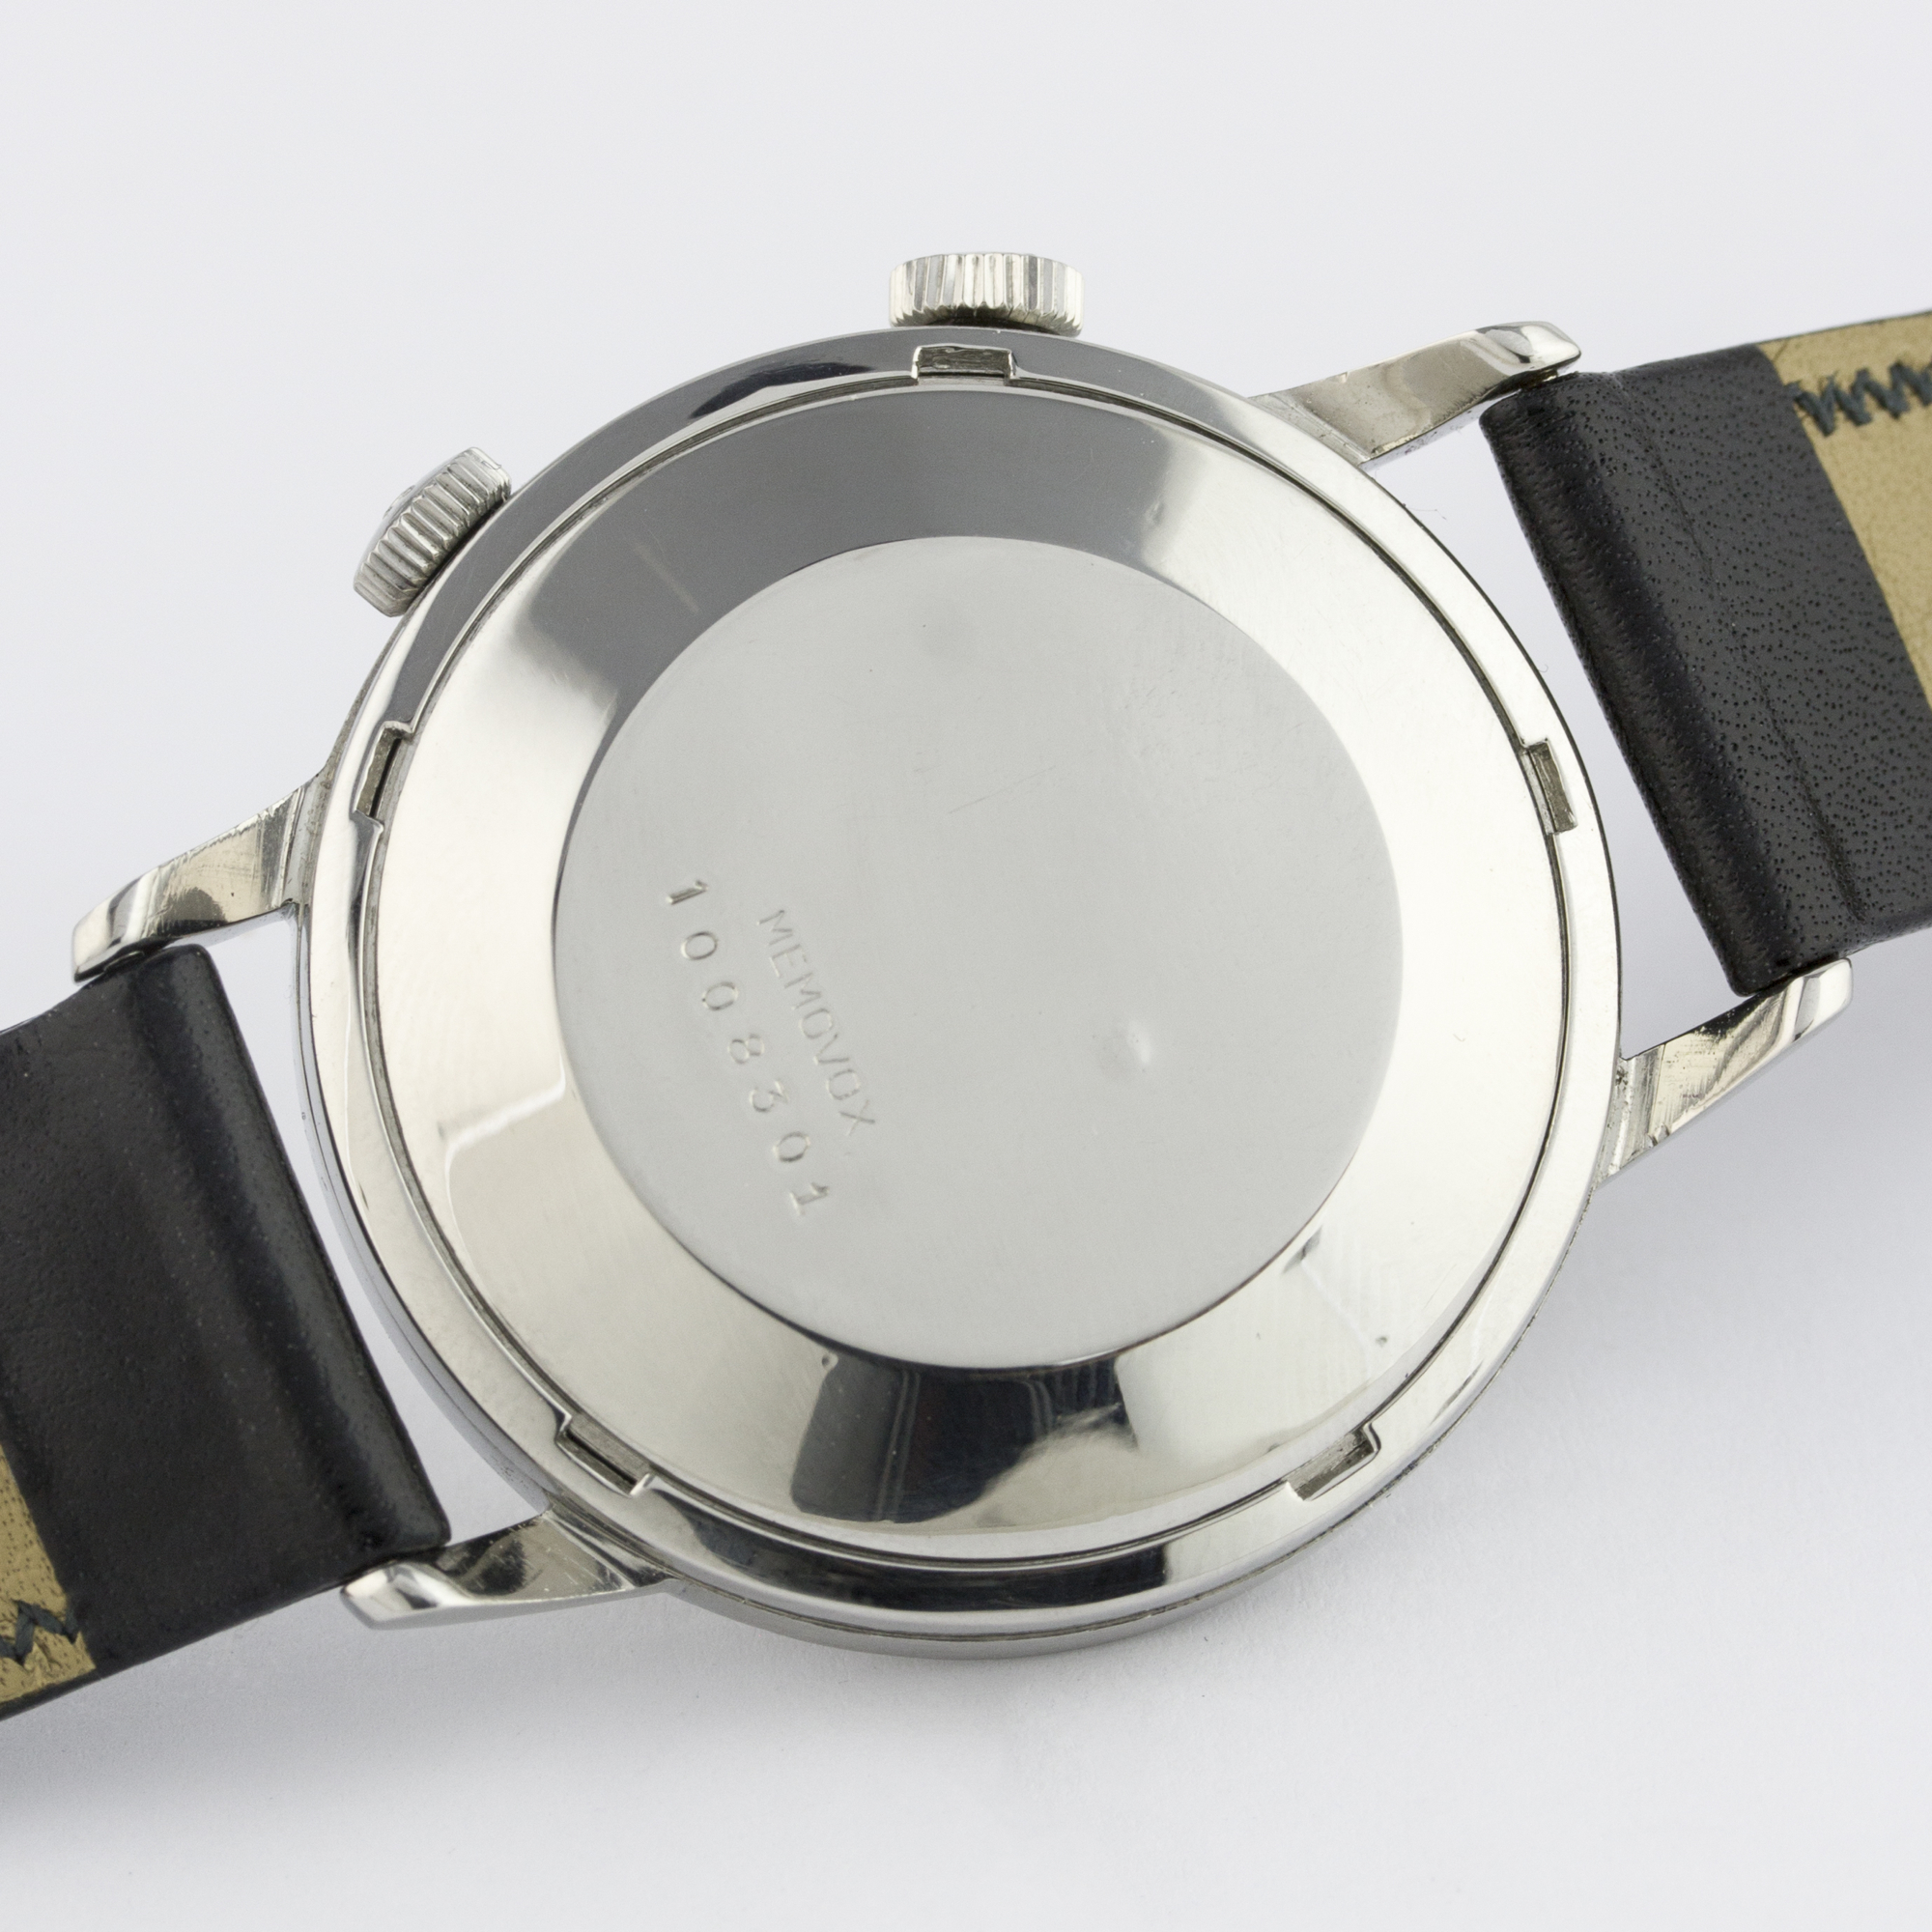 A GENTLEMAN'S STAINLESS STEEL JAEGER LECOULTRE AUTOMATIC MEMOVOX ALARM WRIST WATCH CIRCA 1960s D: - Image 5 of 7